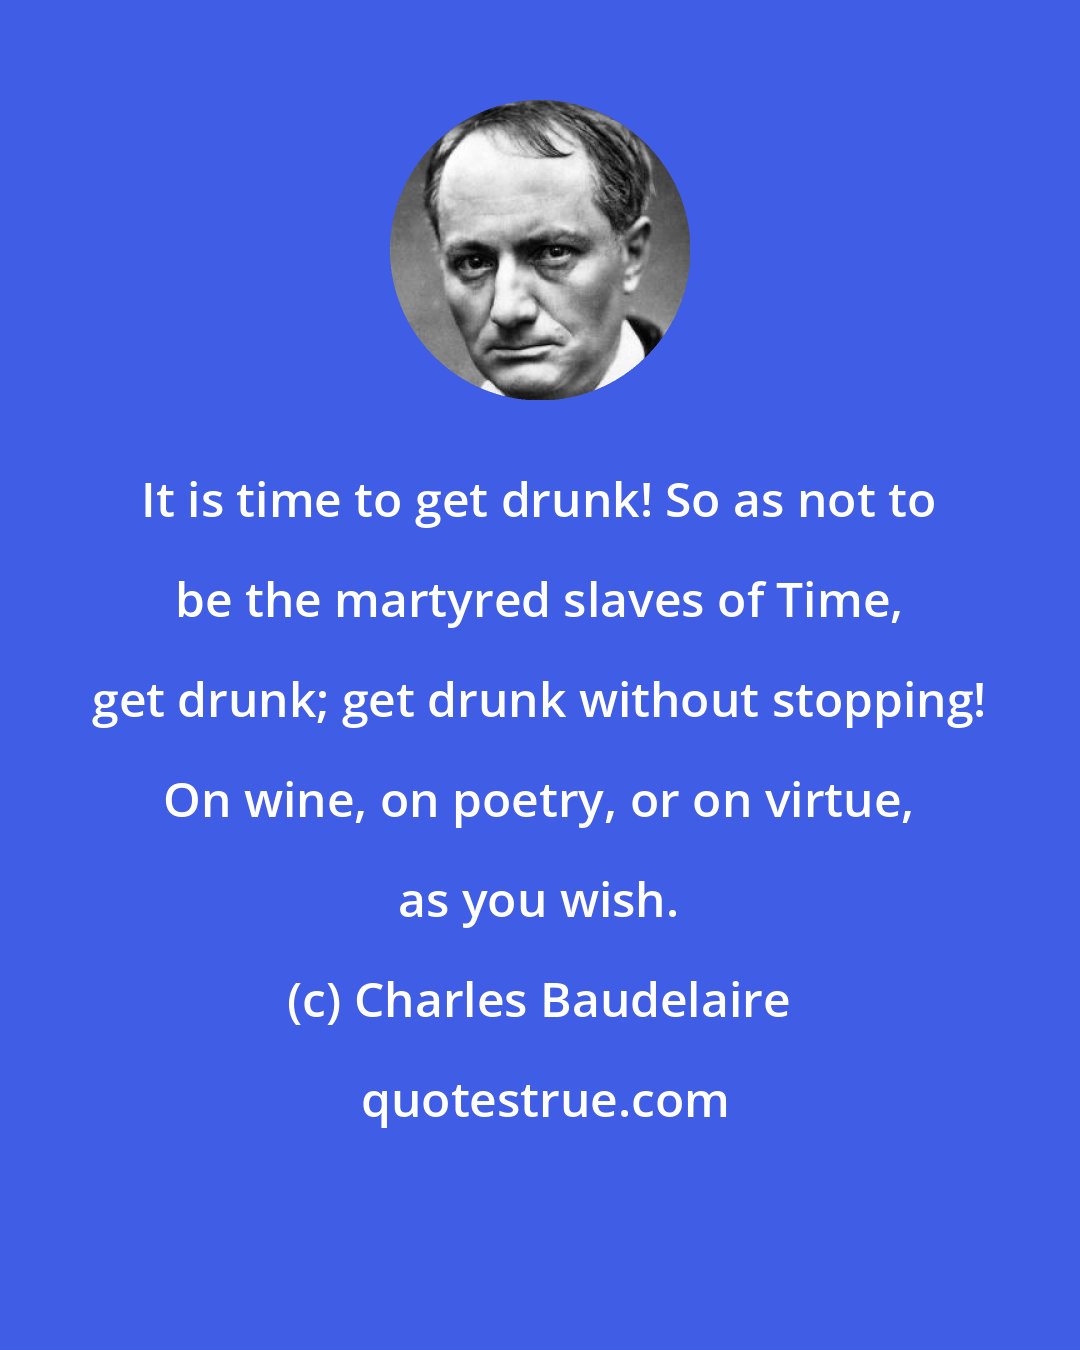 Charles Baudelaire: It is time to get drunk! So as not to be the martyred slaves of Time, get drunk; get drunk without stopping! On wine, on poetry, or on virtue, as you wish.